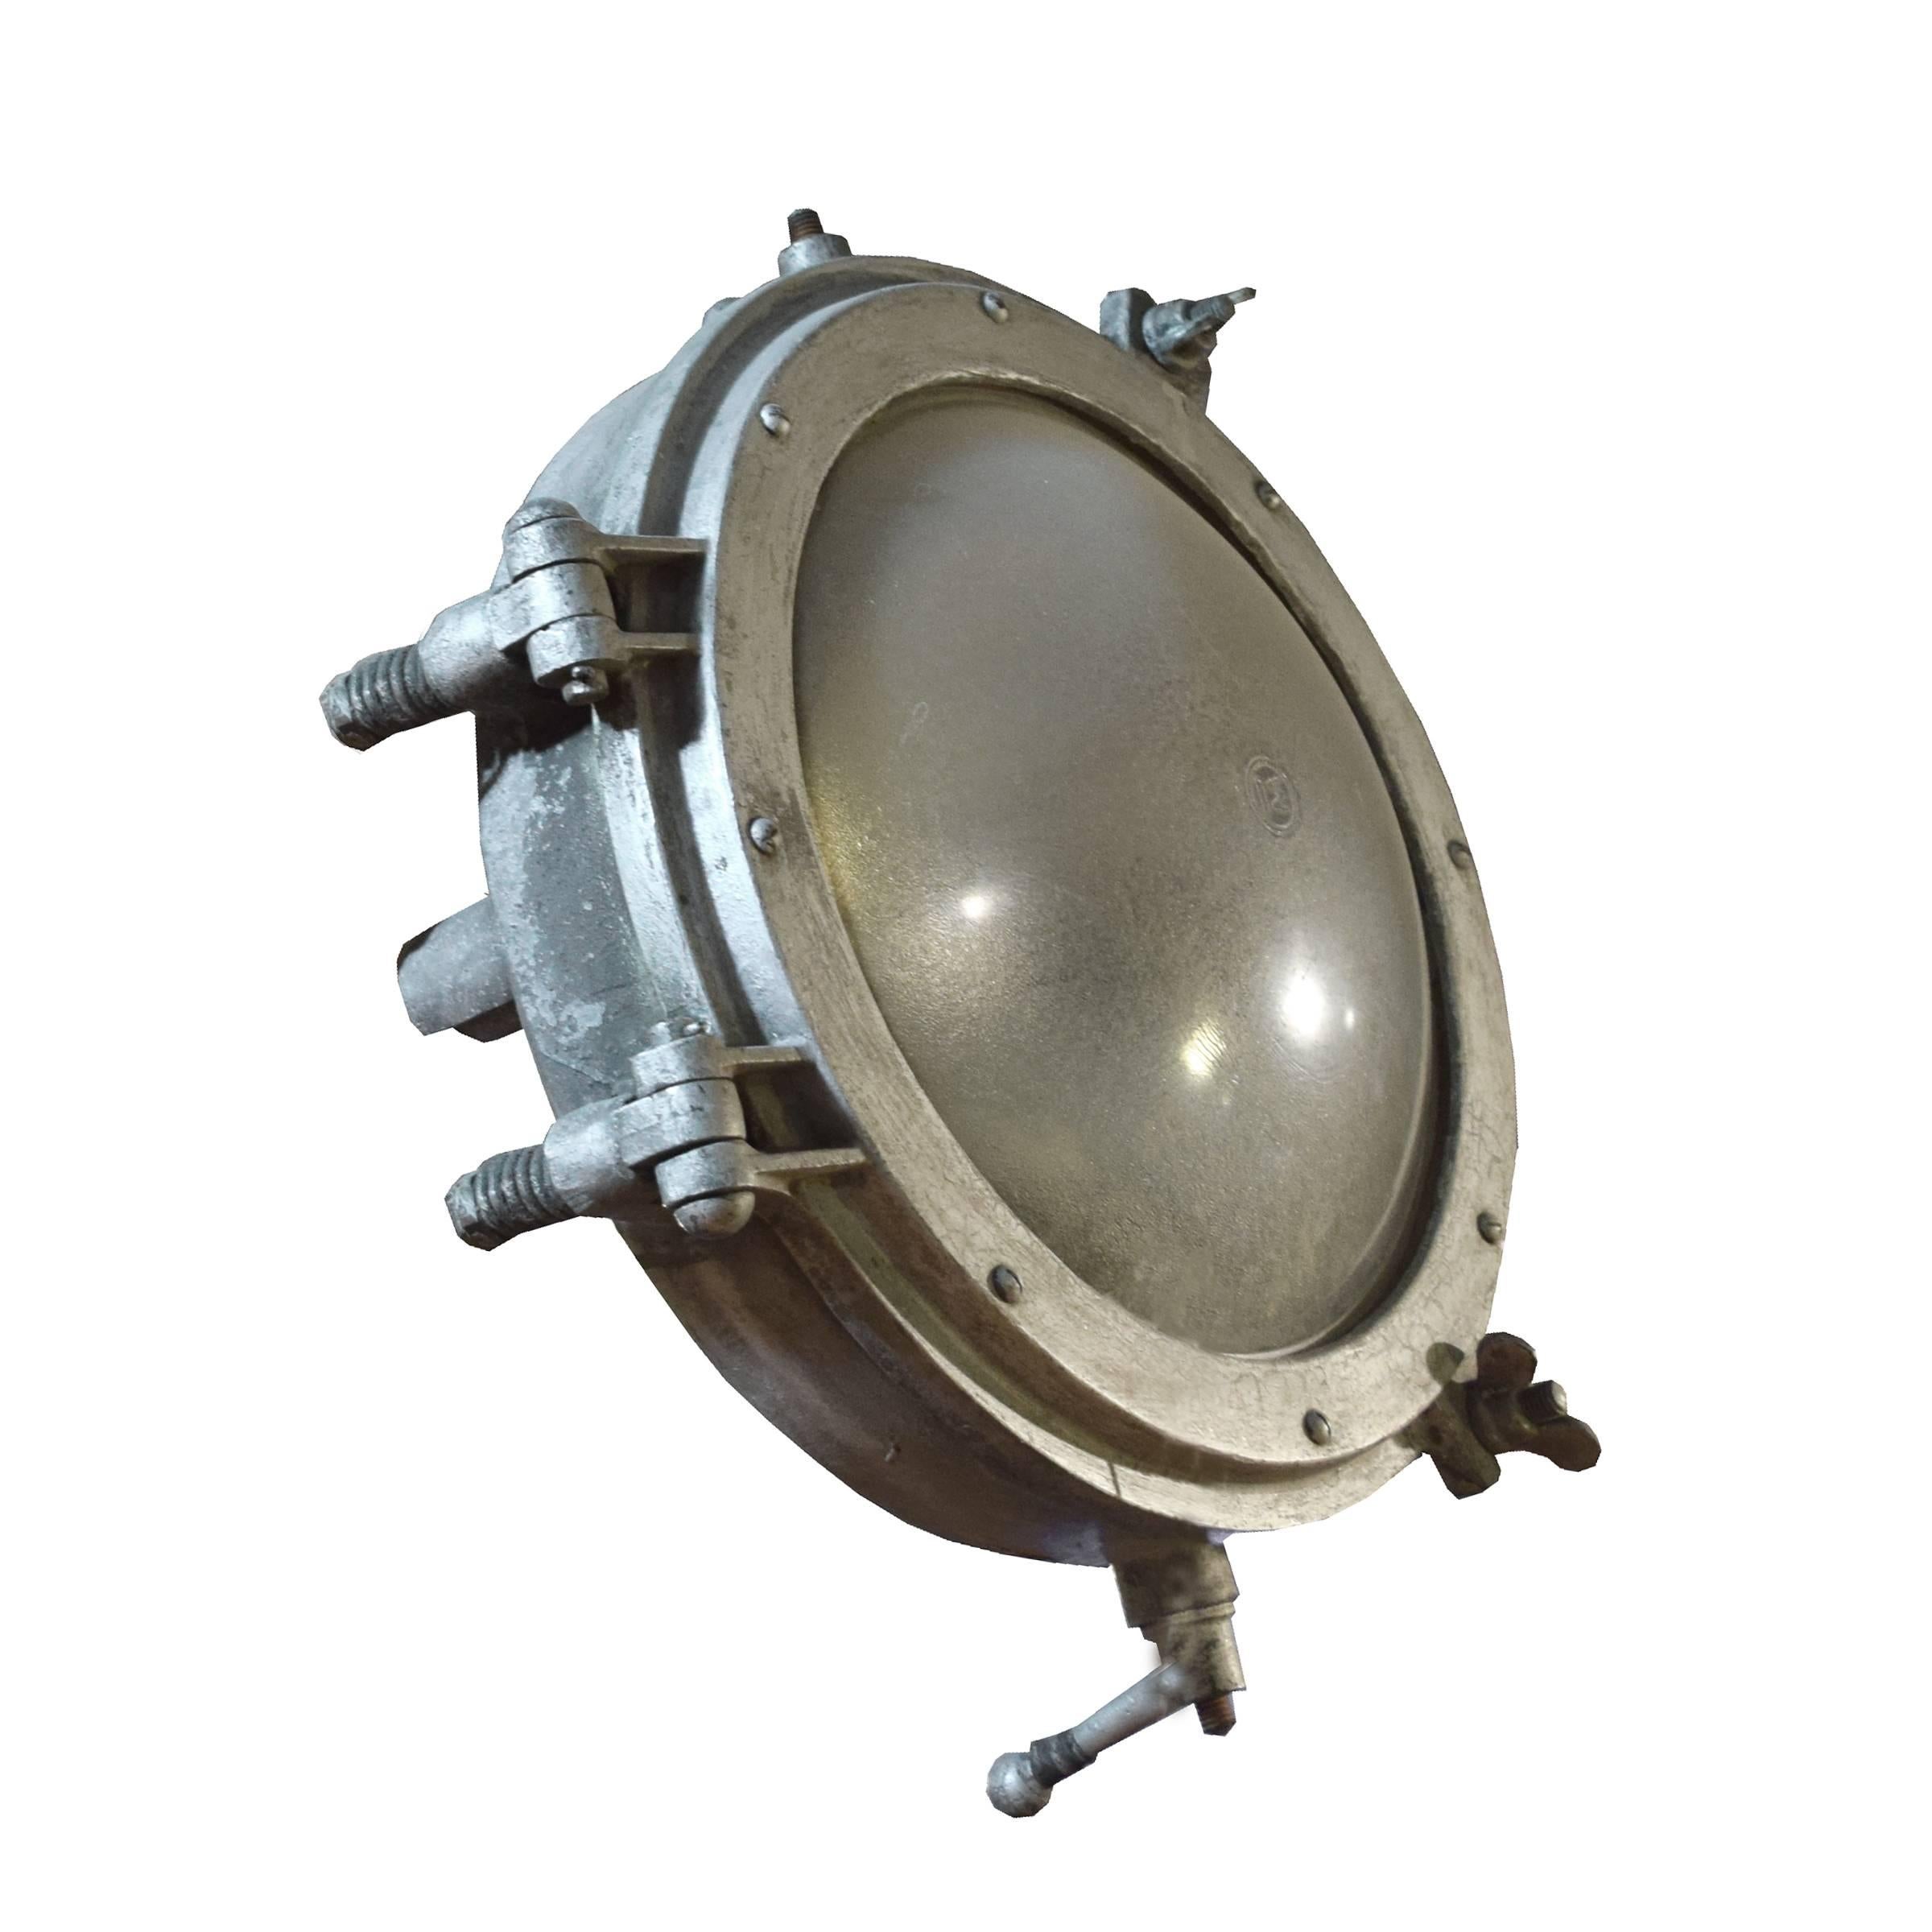 A funky American industrial round light fixture with a convex frosted glass shade.
Requires re-wiring.